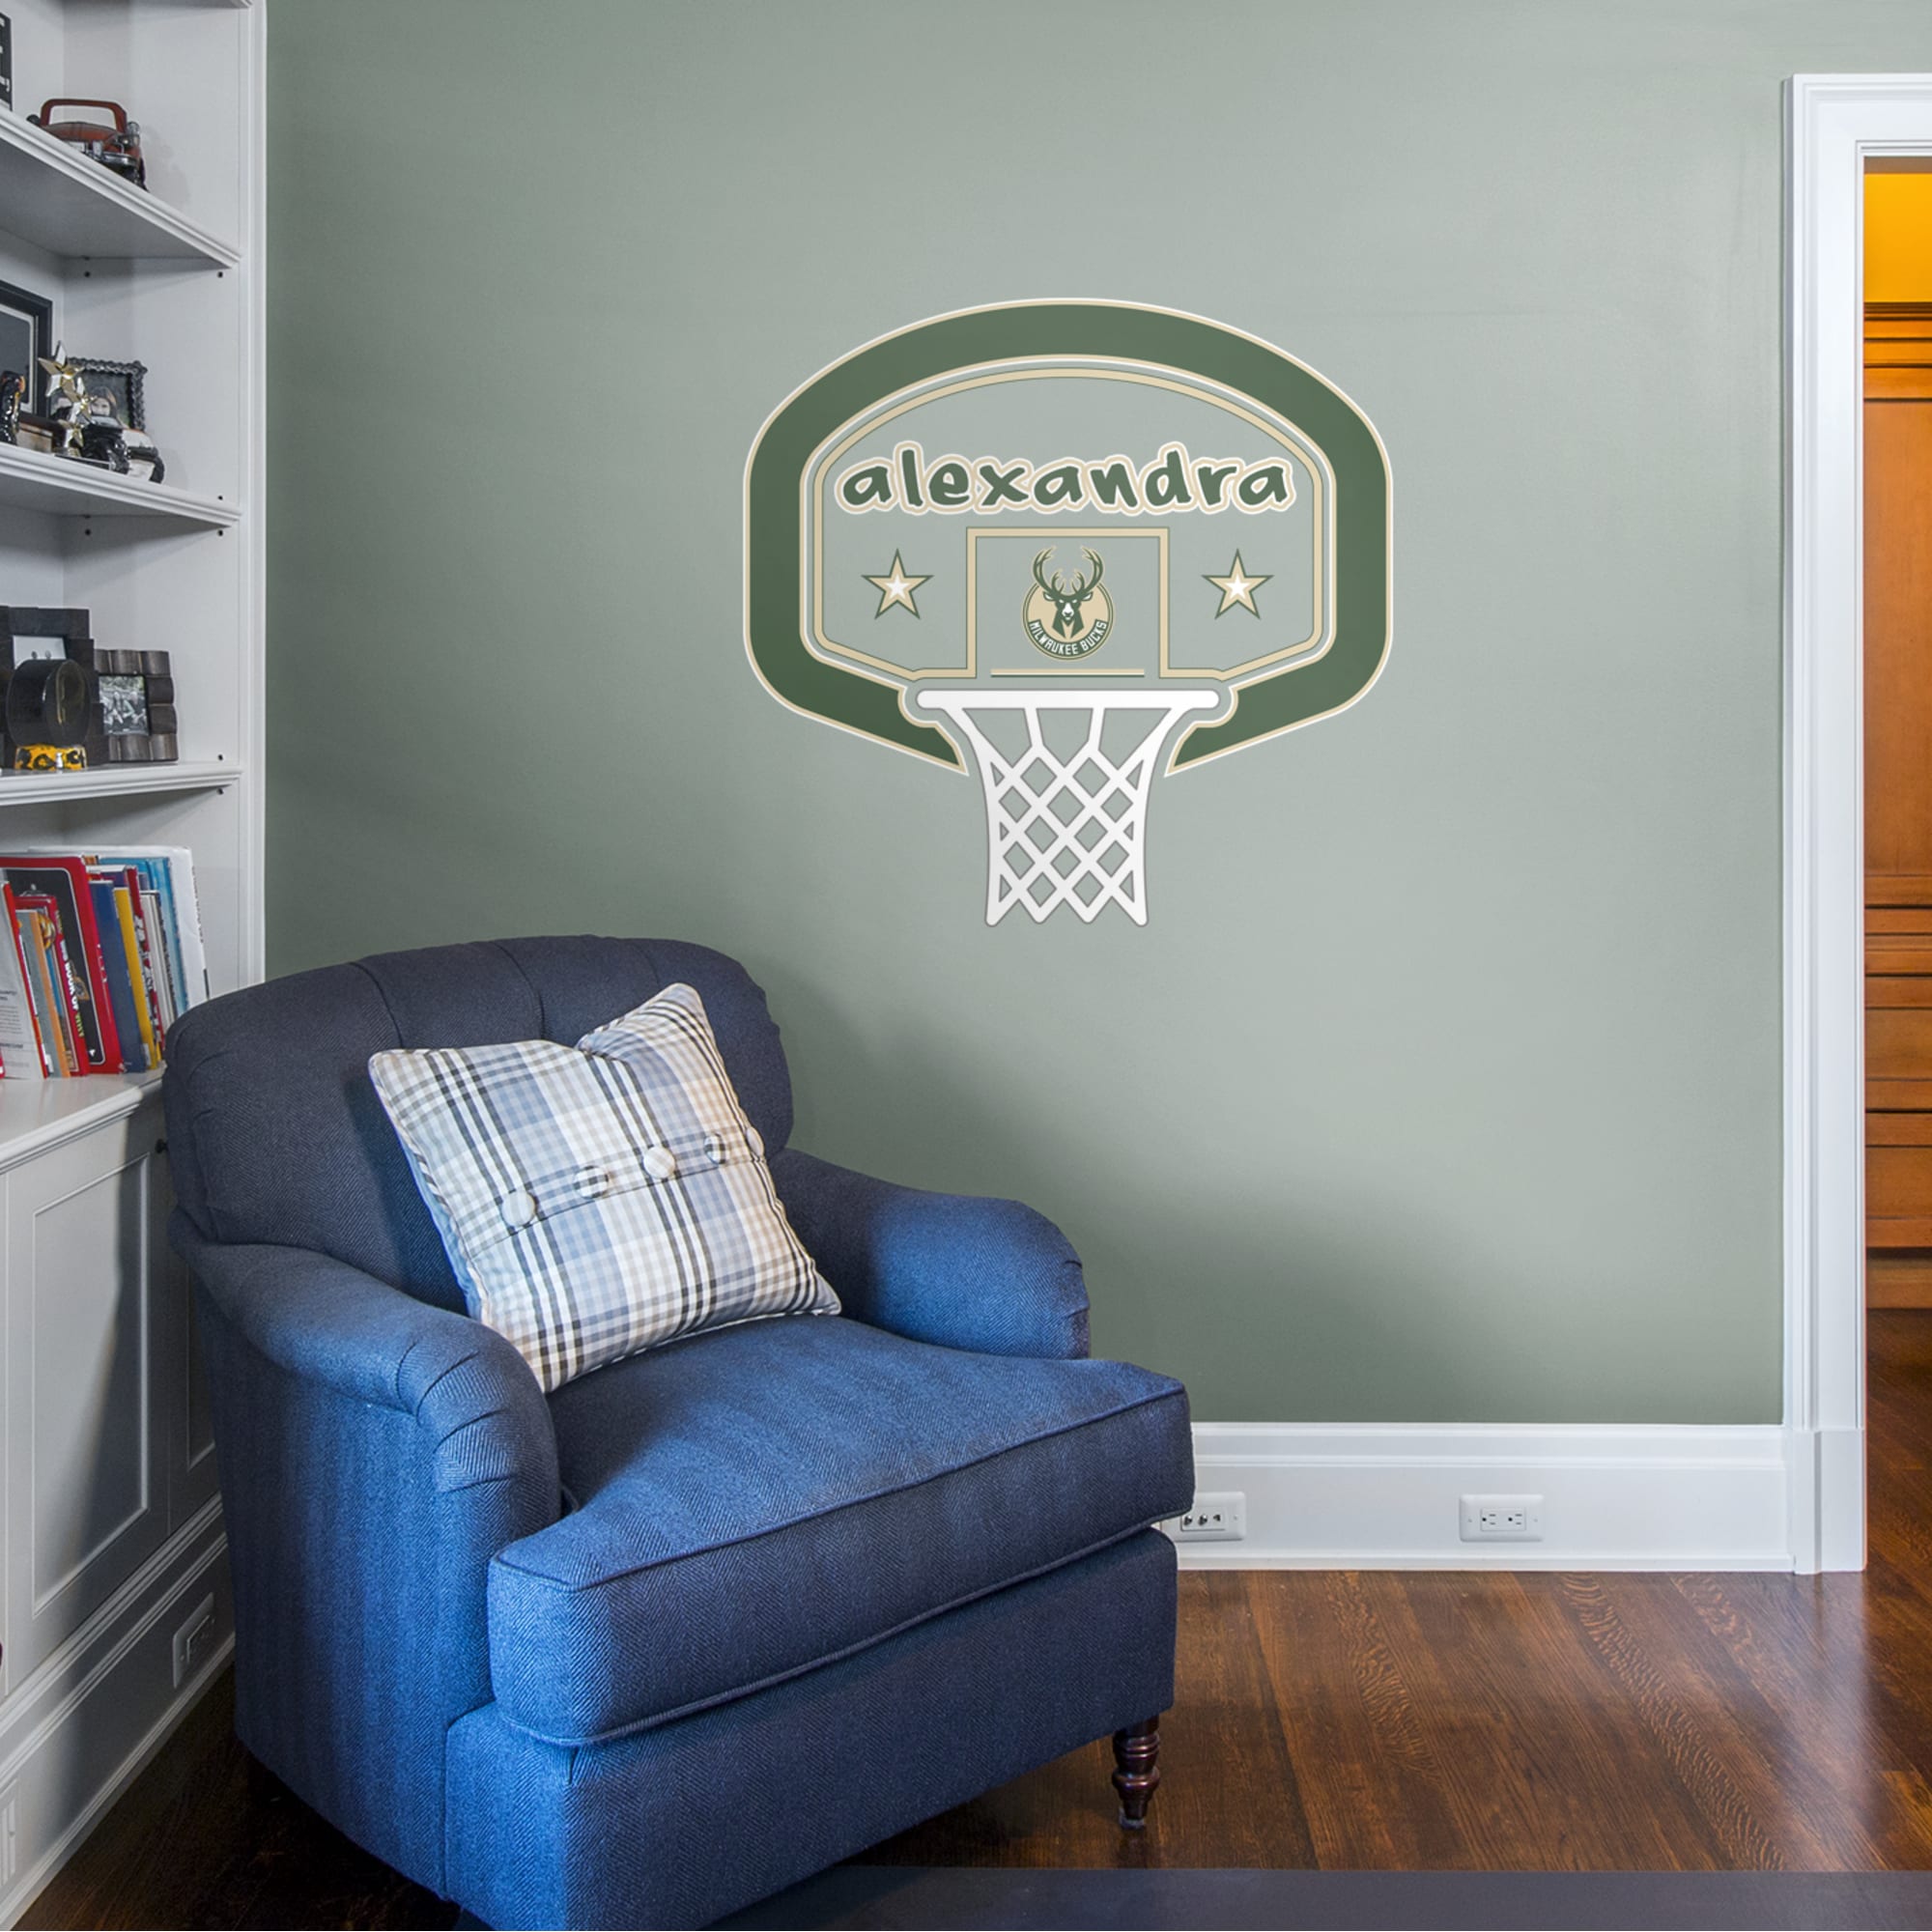 Milwaukee Bucks: Personalized Name - Officially Licensed NBA Transfer Decal 52.0"W x 39.5"H by Fathead | Vinyl